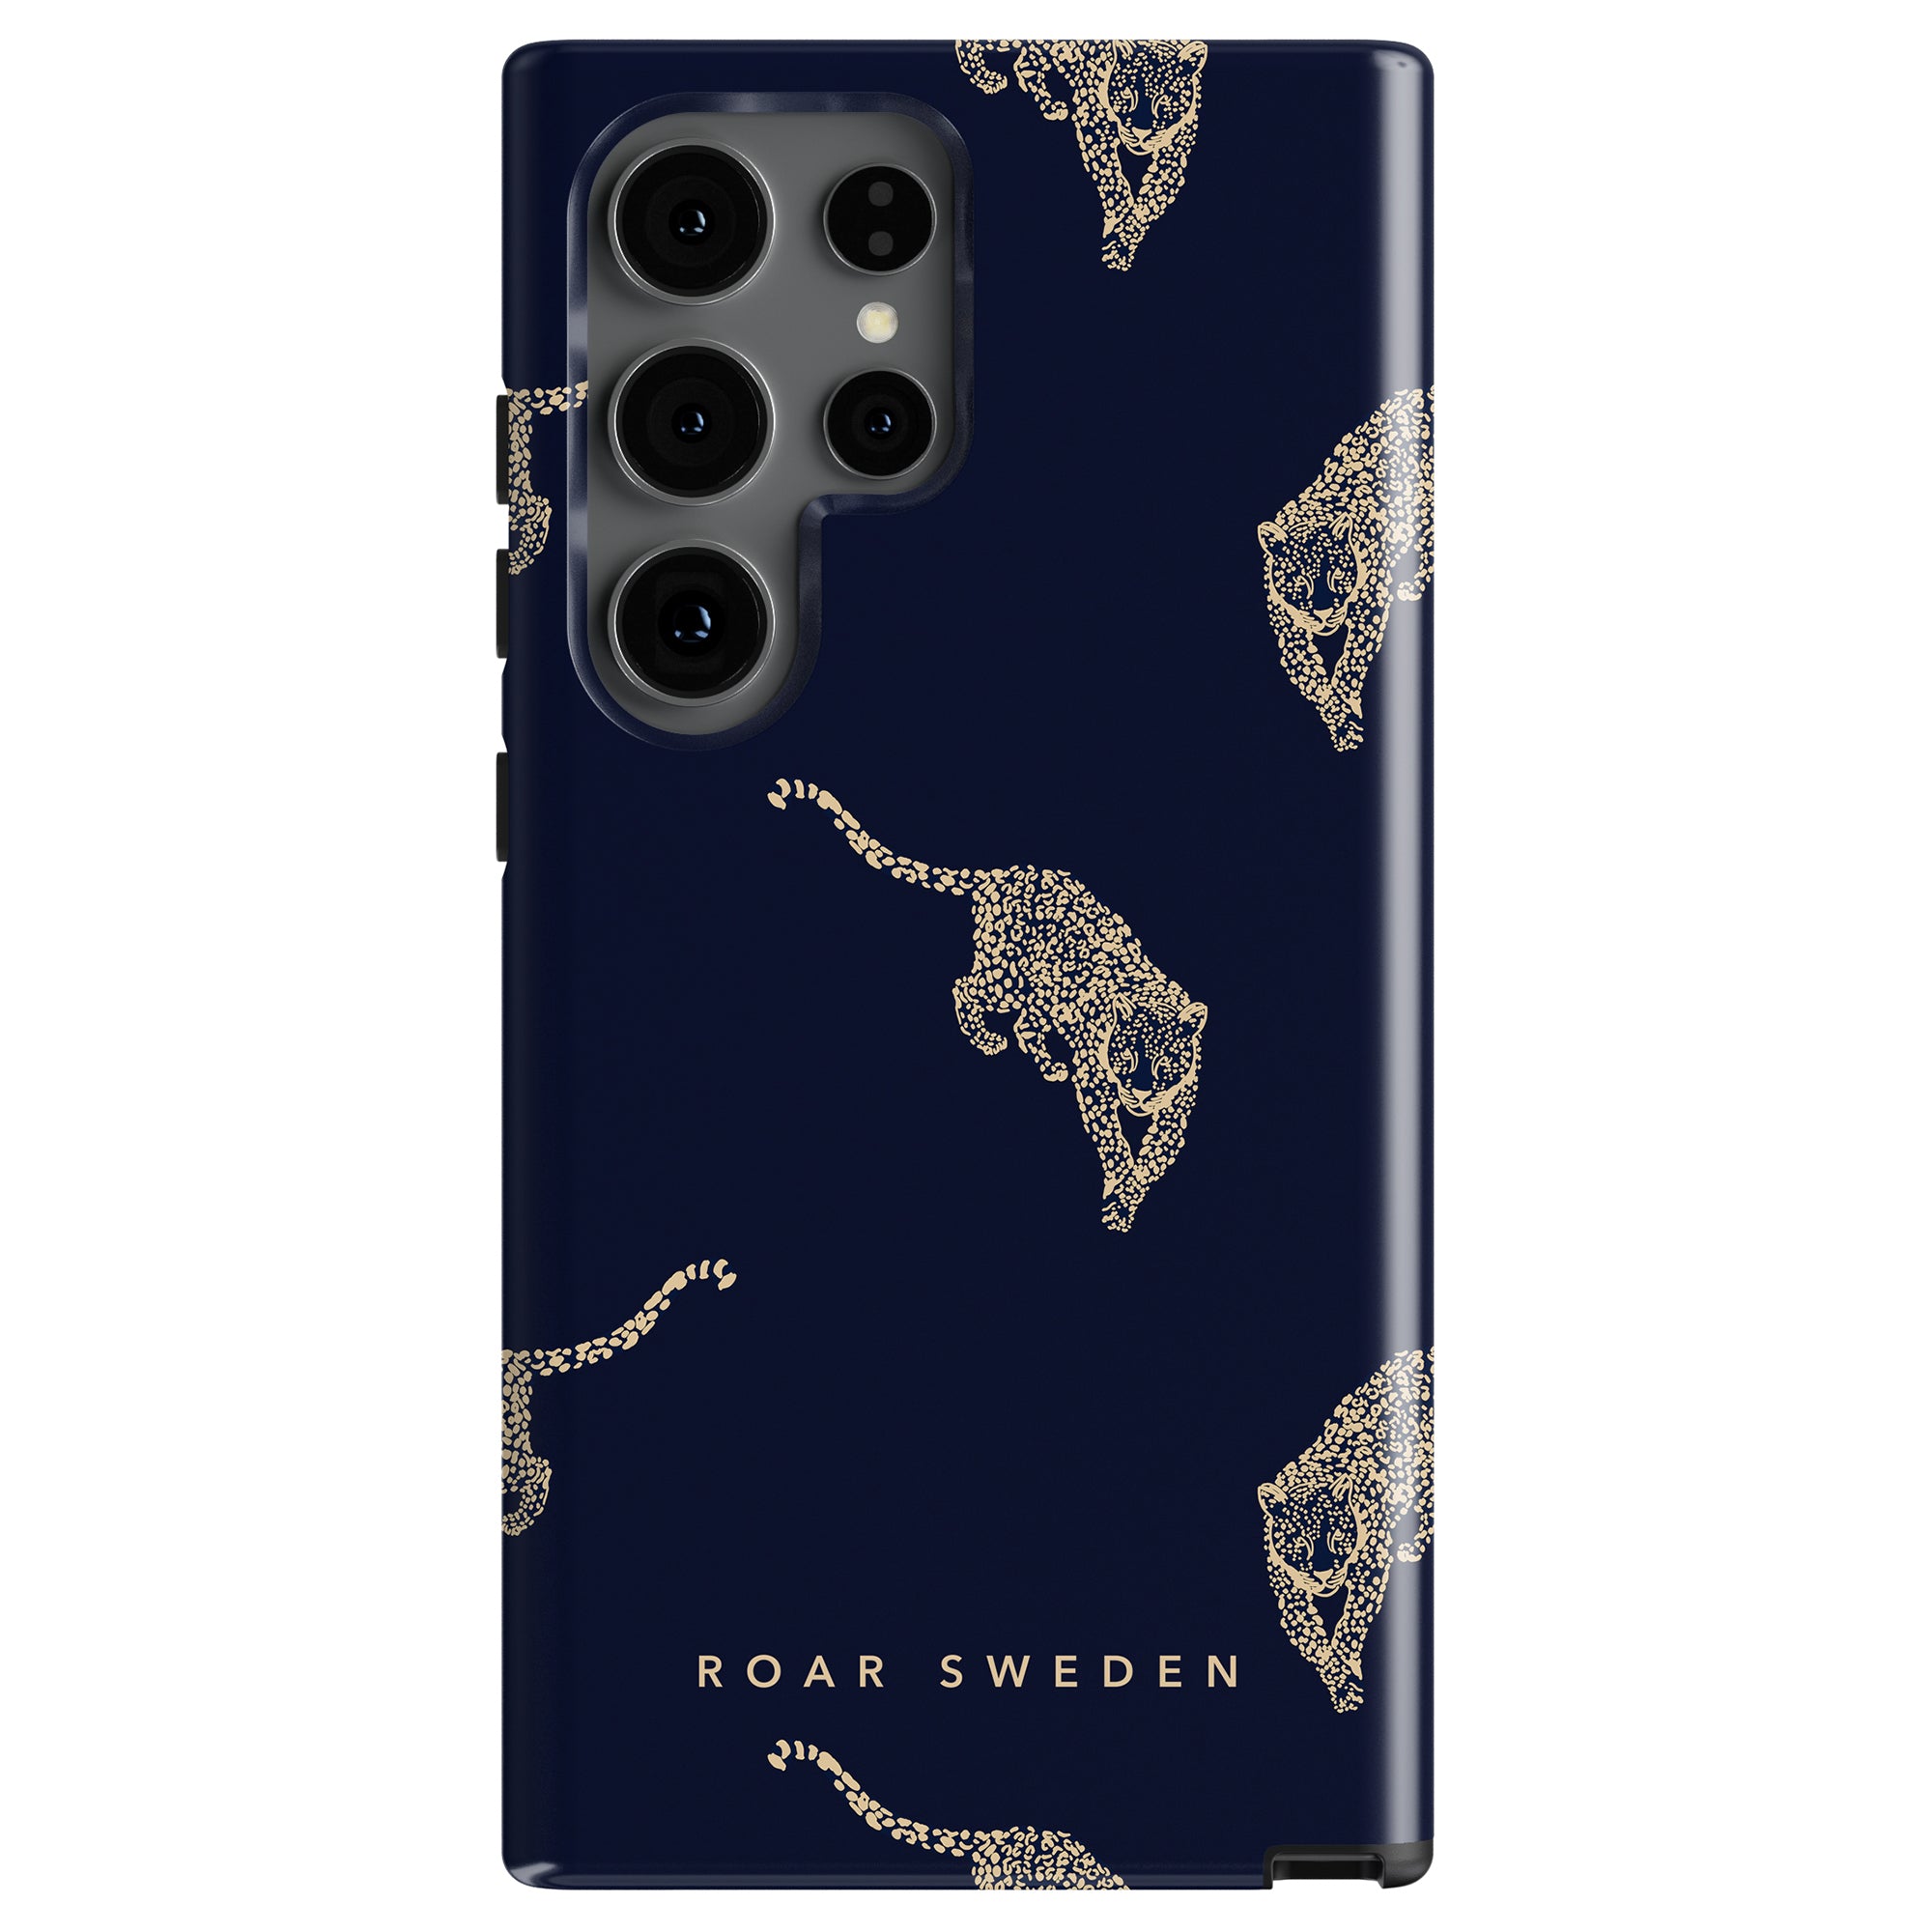 Dark blue smartphone case with a pattern of golden leopard prints, labeled "Kitty Grand - Tough Case," designed to fit a phone with a triple-lens camera.